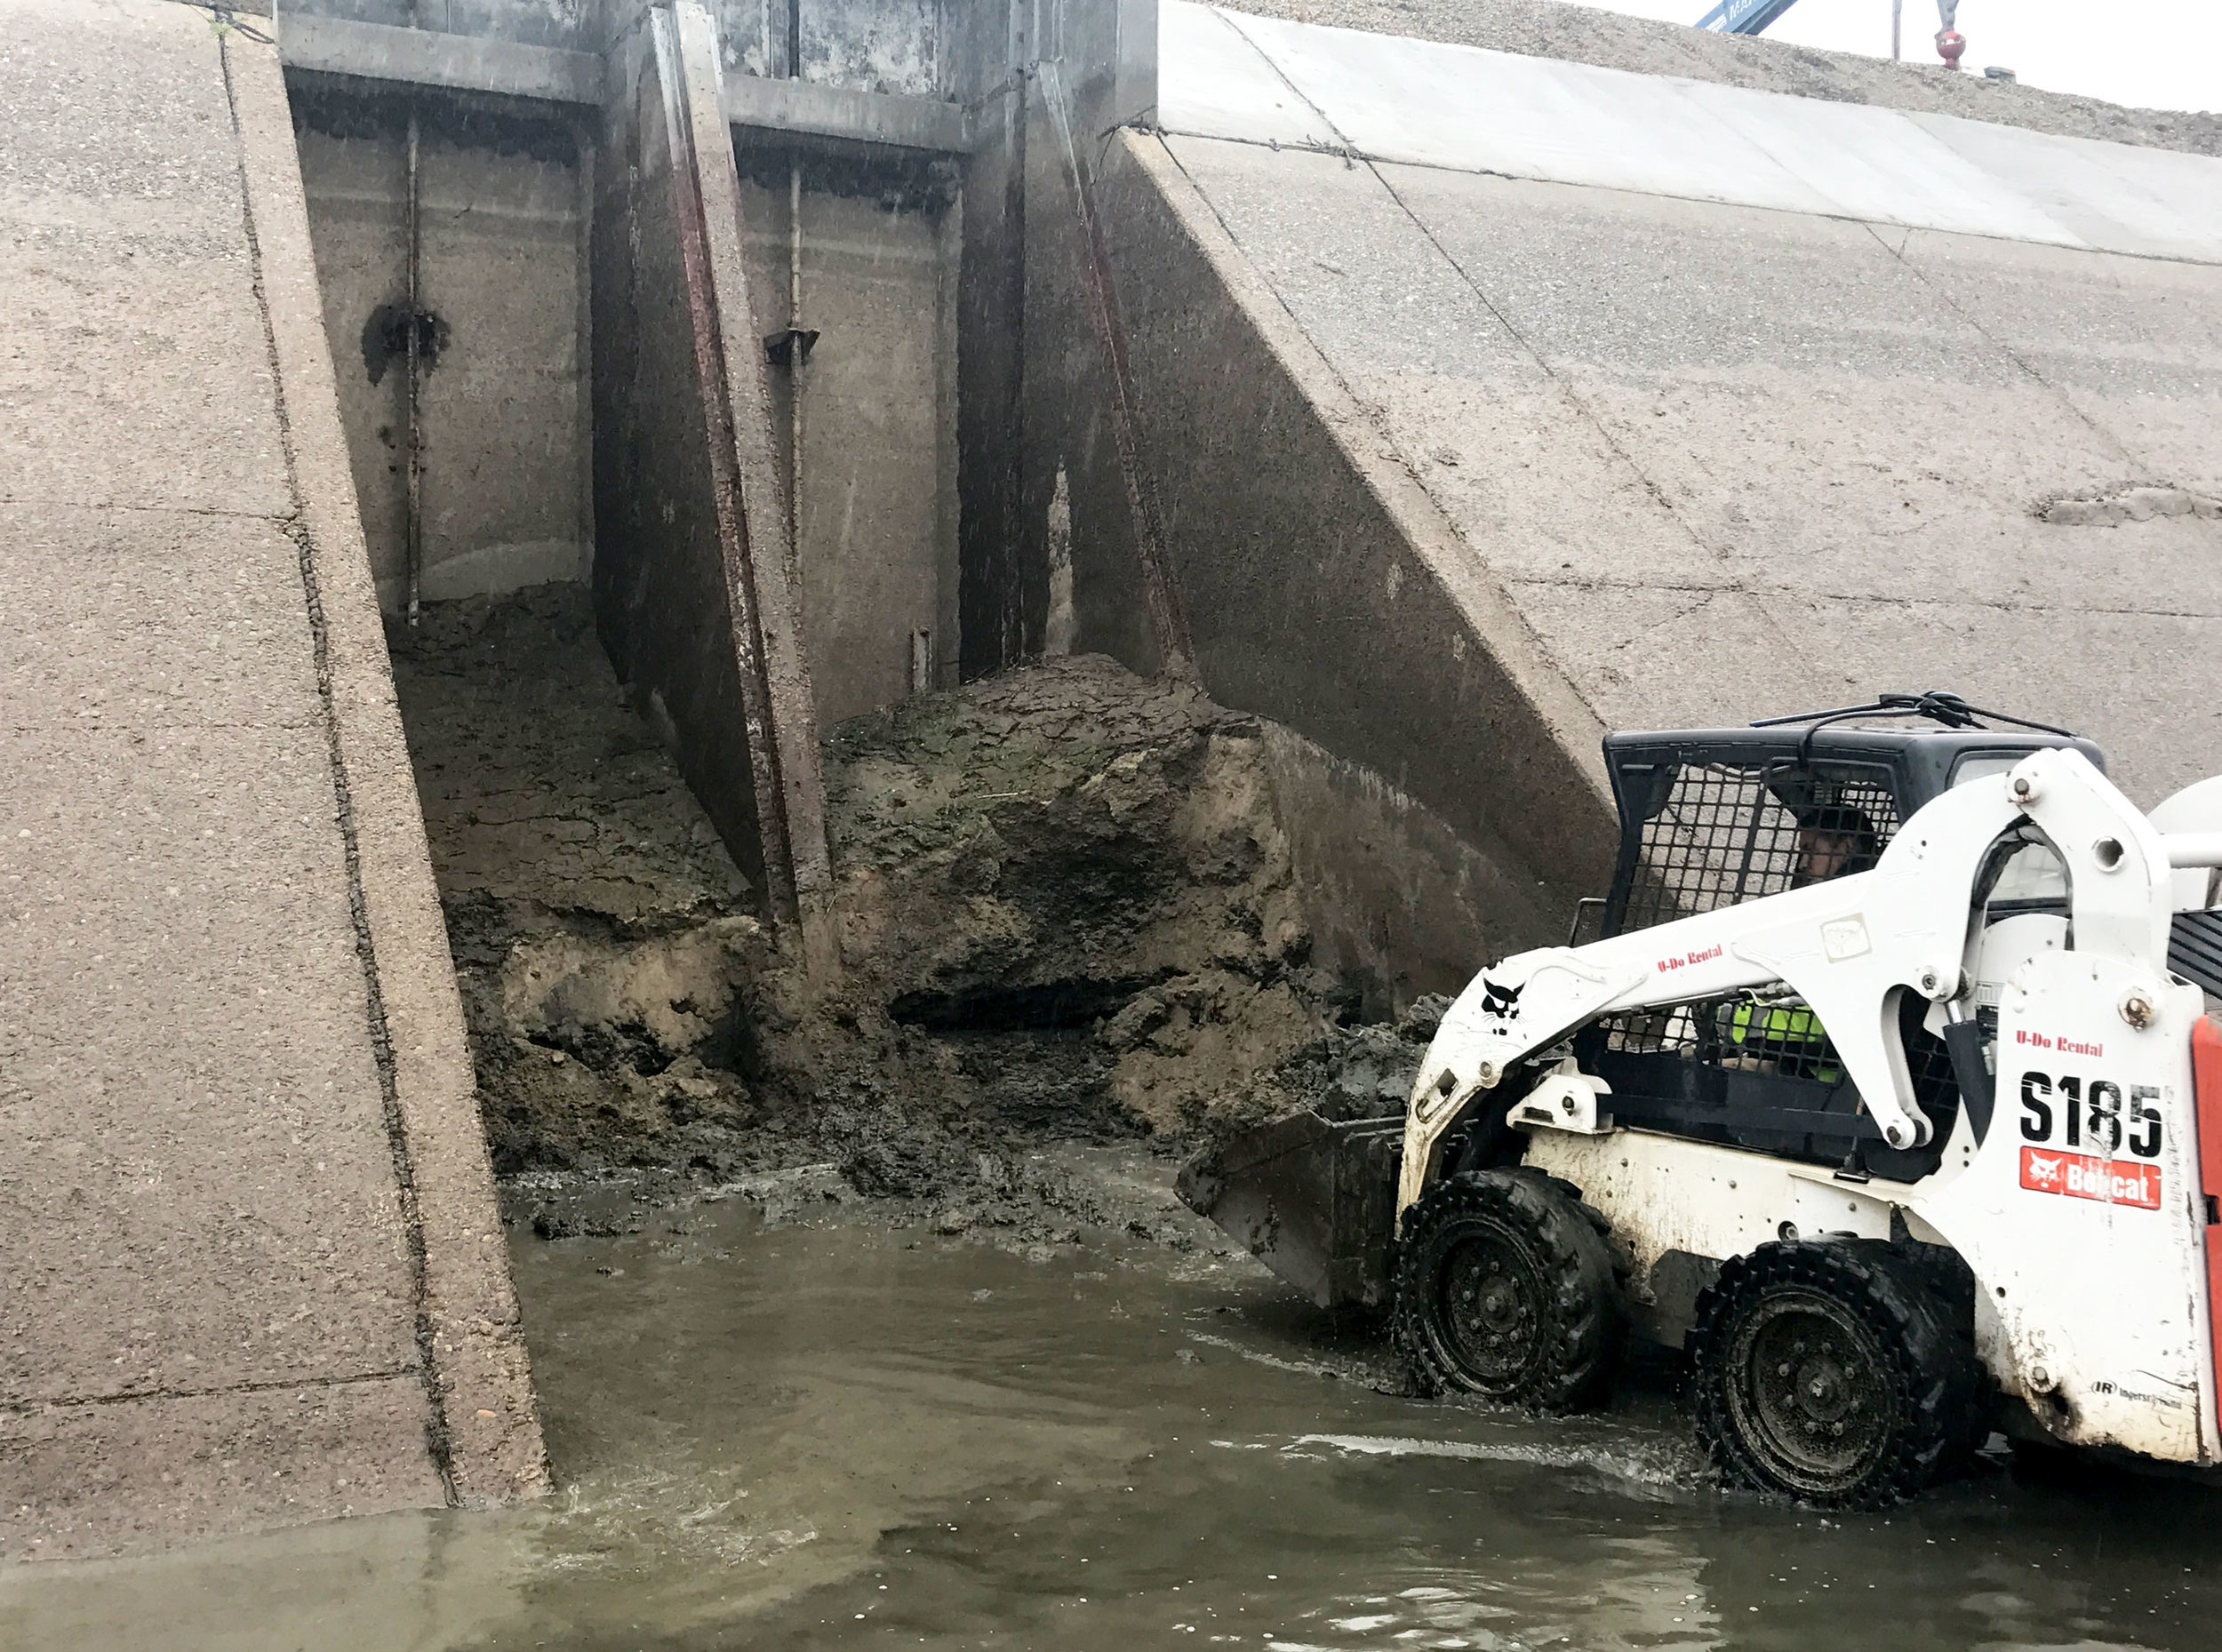  Turnout being cleared of silt and debris along the Friant Kern Canal 